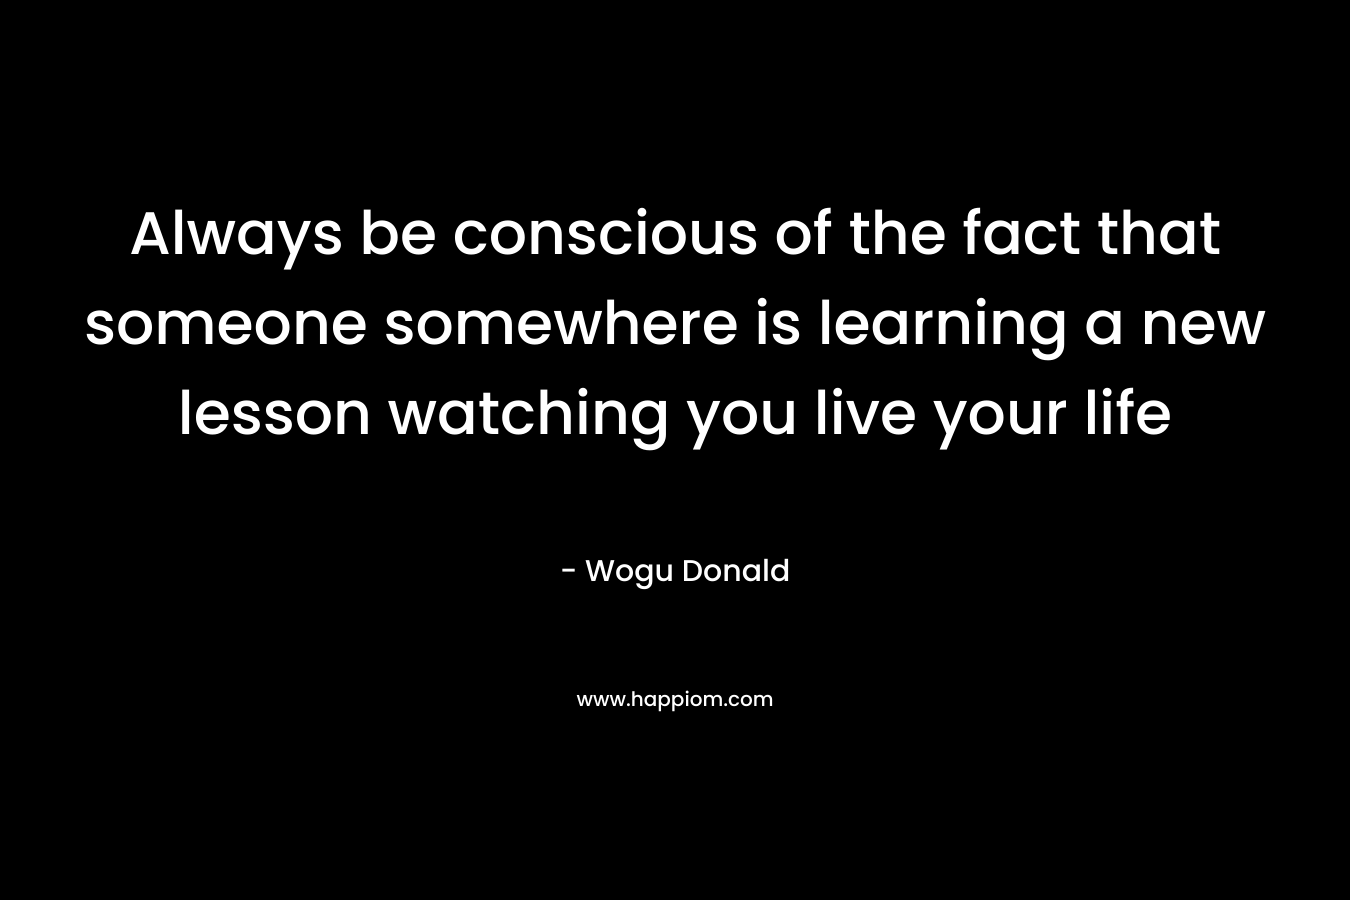 Always be conscious of the fact that someone somewhere is learning a new lesson watching you live your life – Wogu Donald